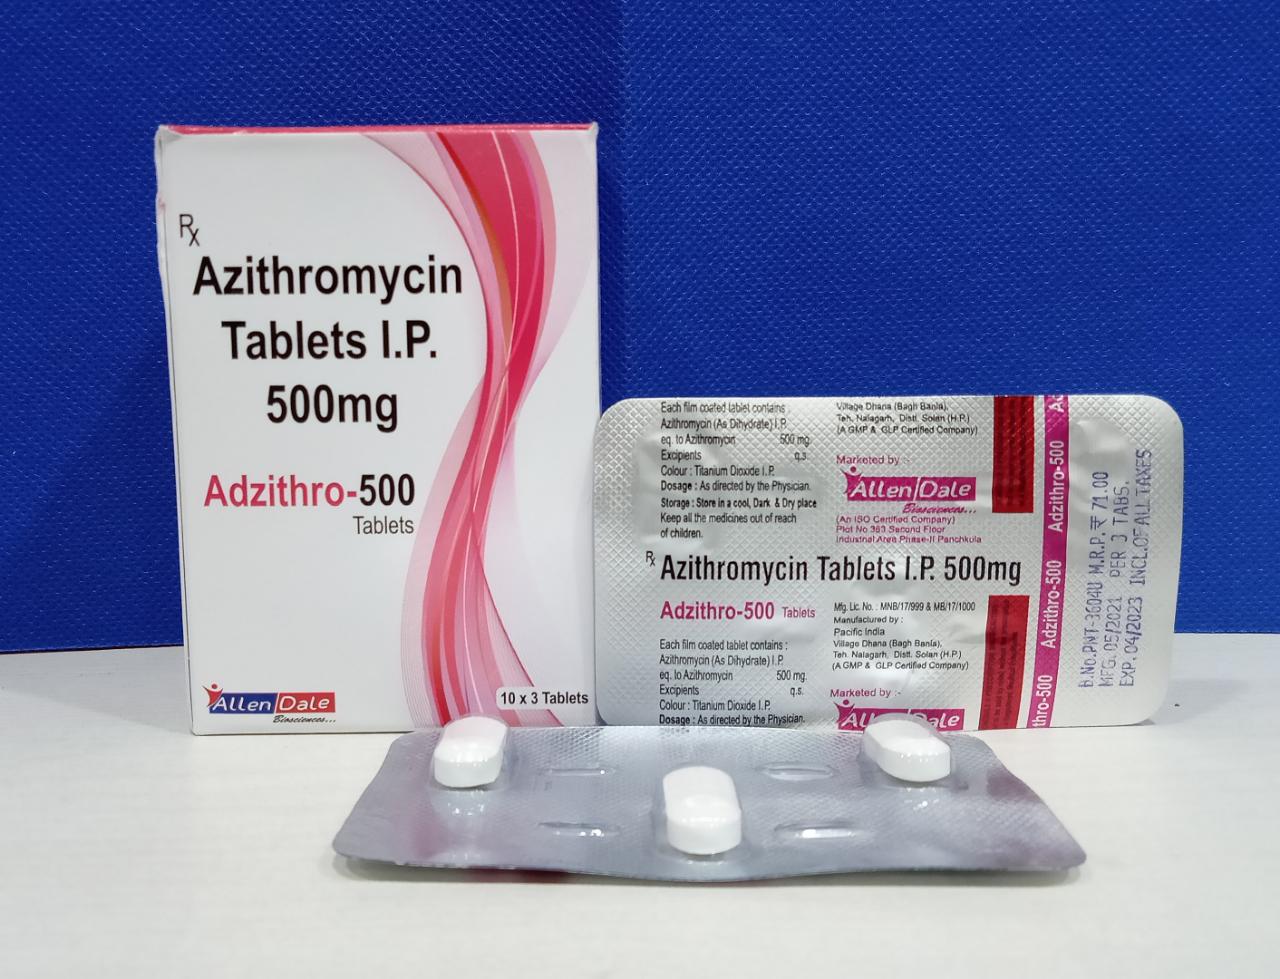 ADZITHRO 500 Tablets